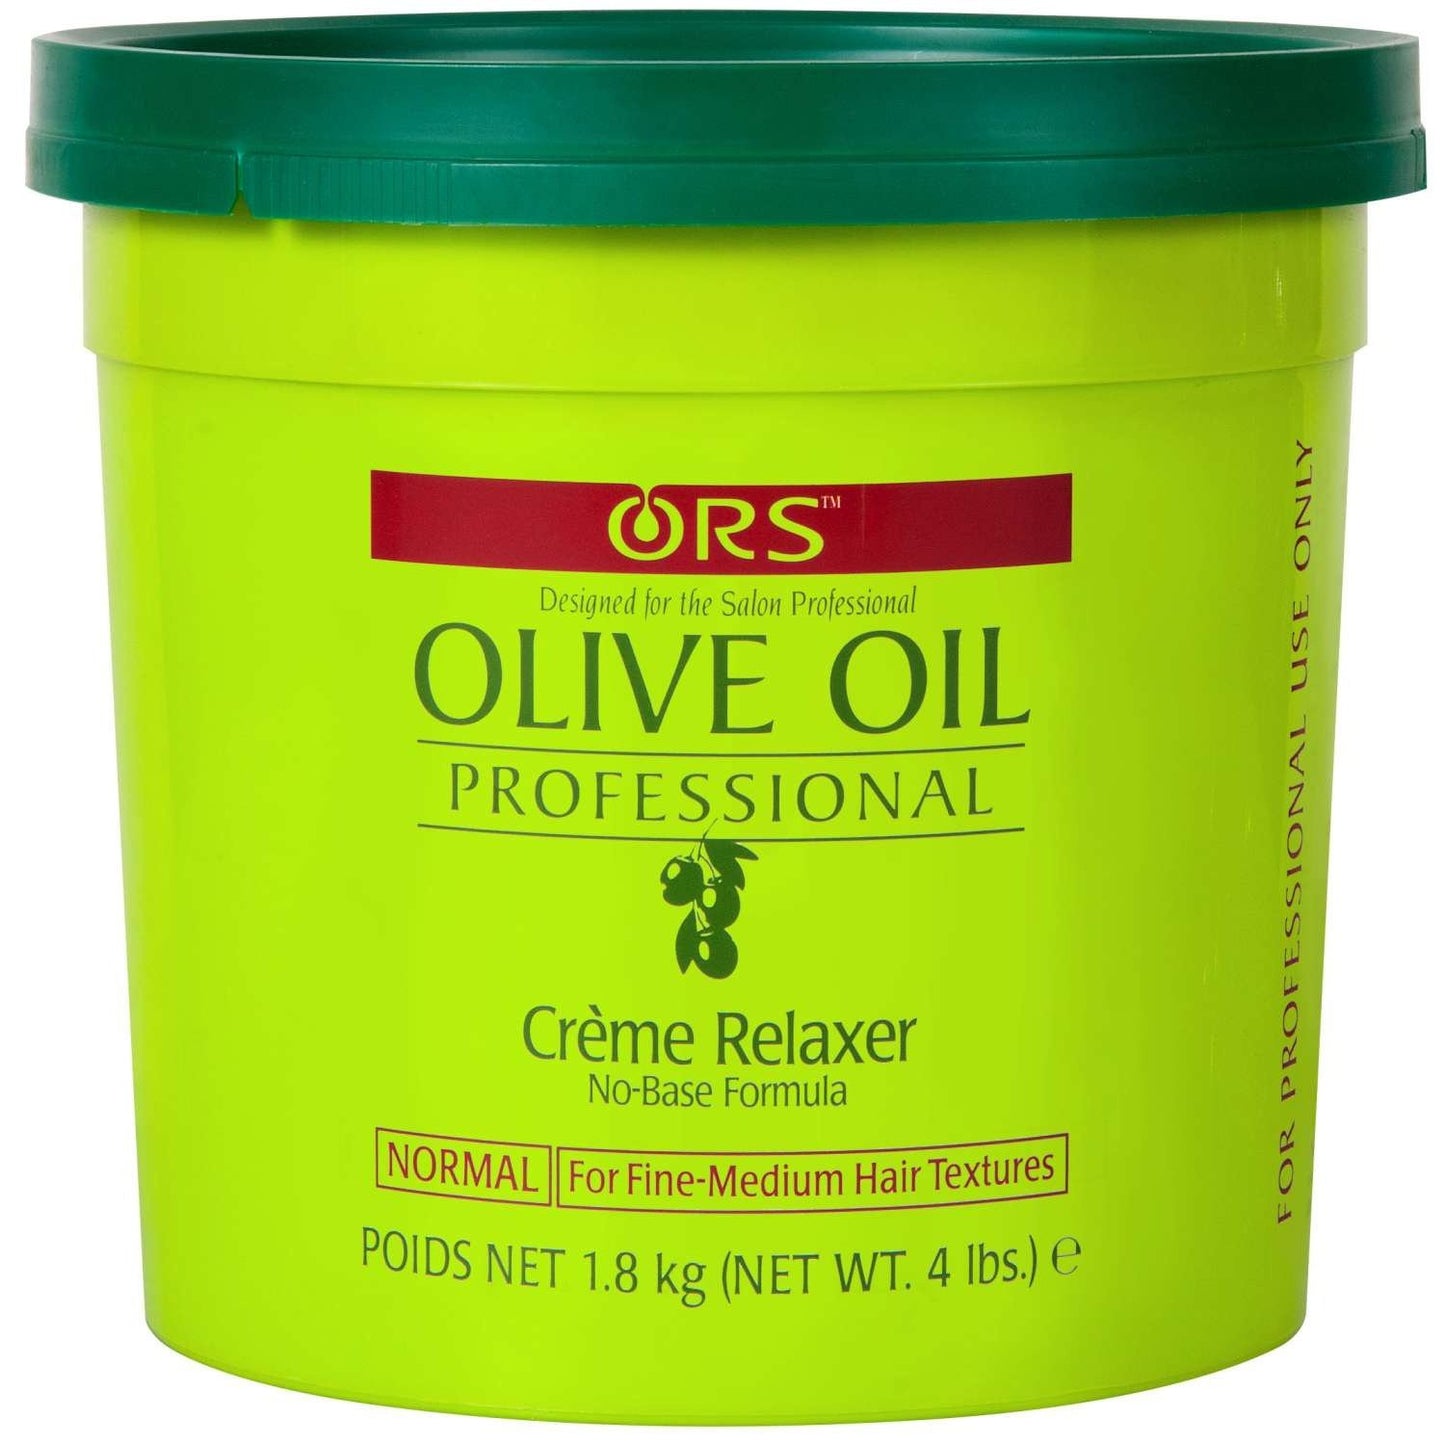 Ors Olive Oil Professional No Base Cream Relaxer Normal